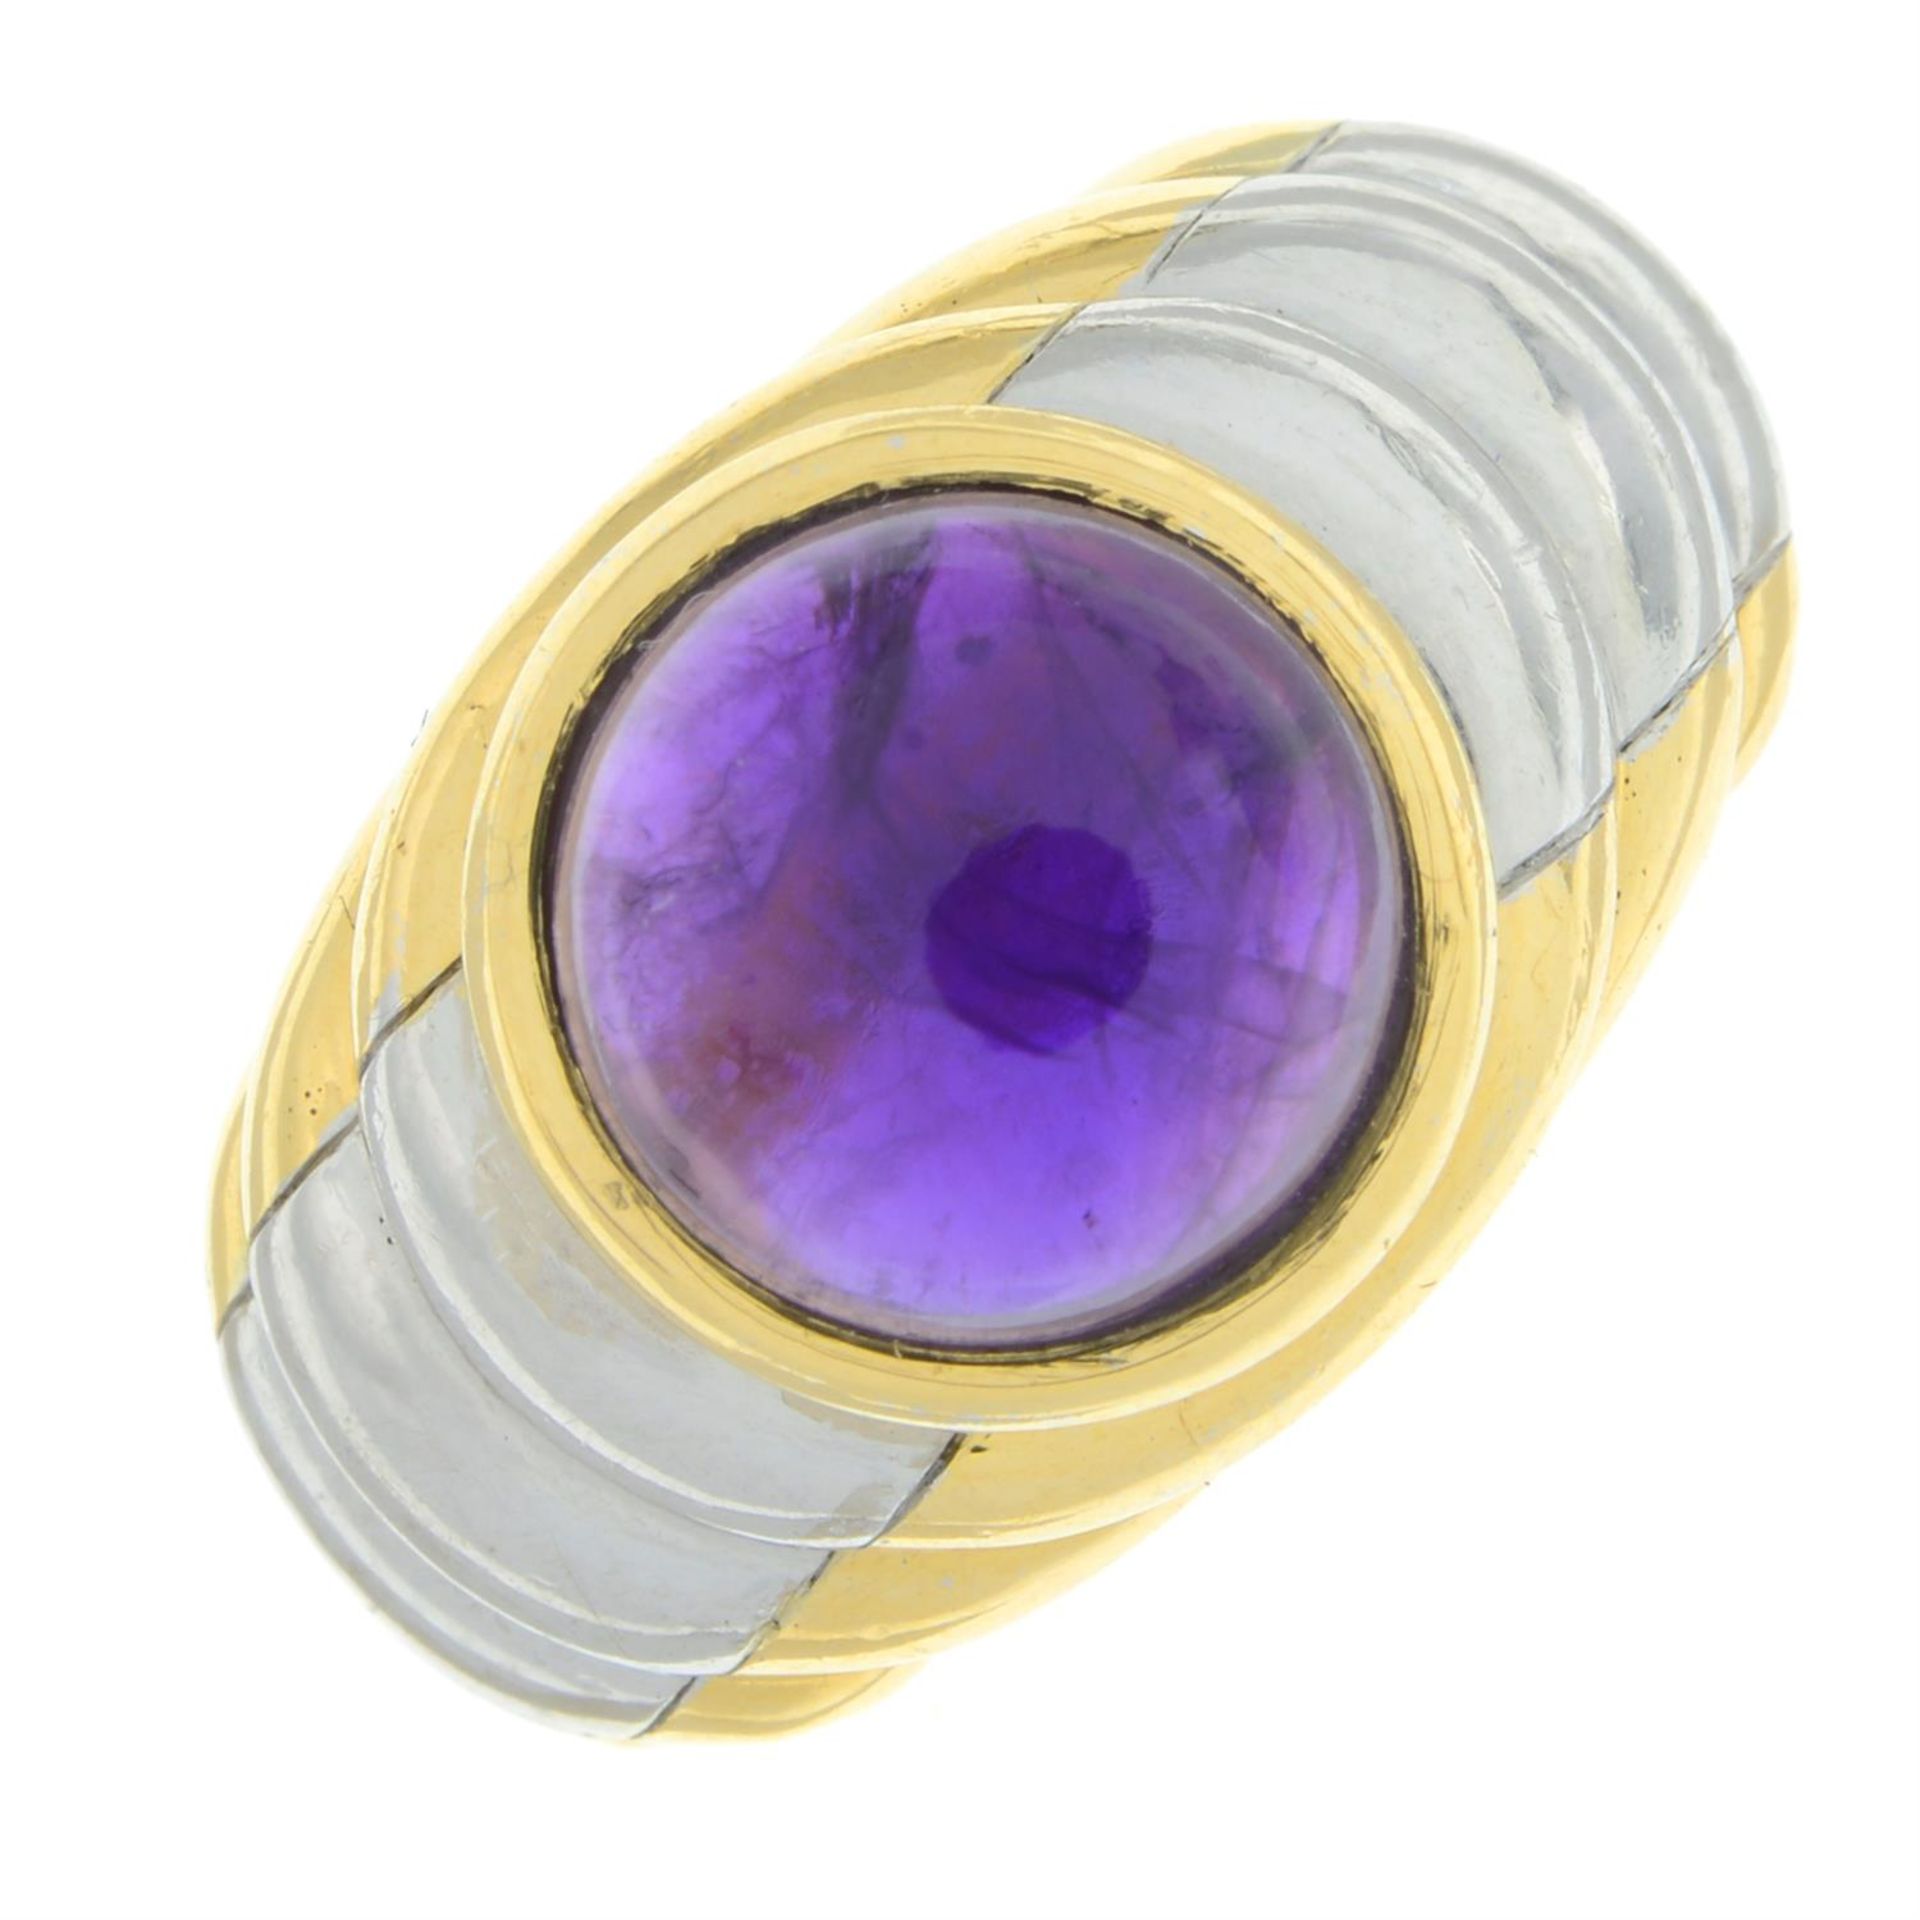 Amethyst ring, by Mauboussin - Image 2 of 5